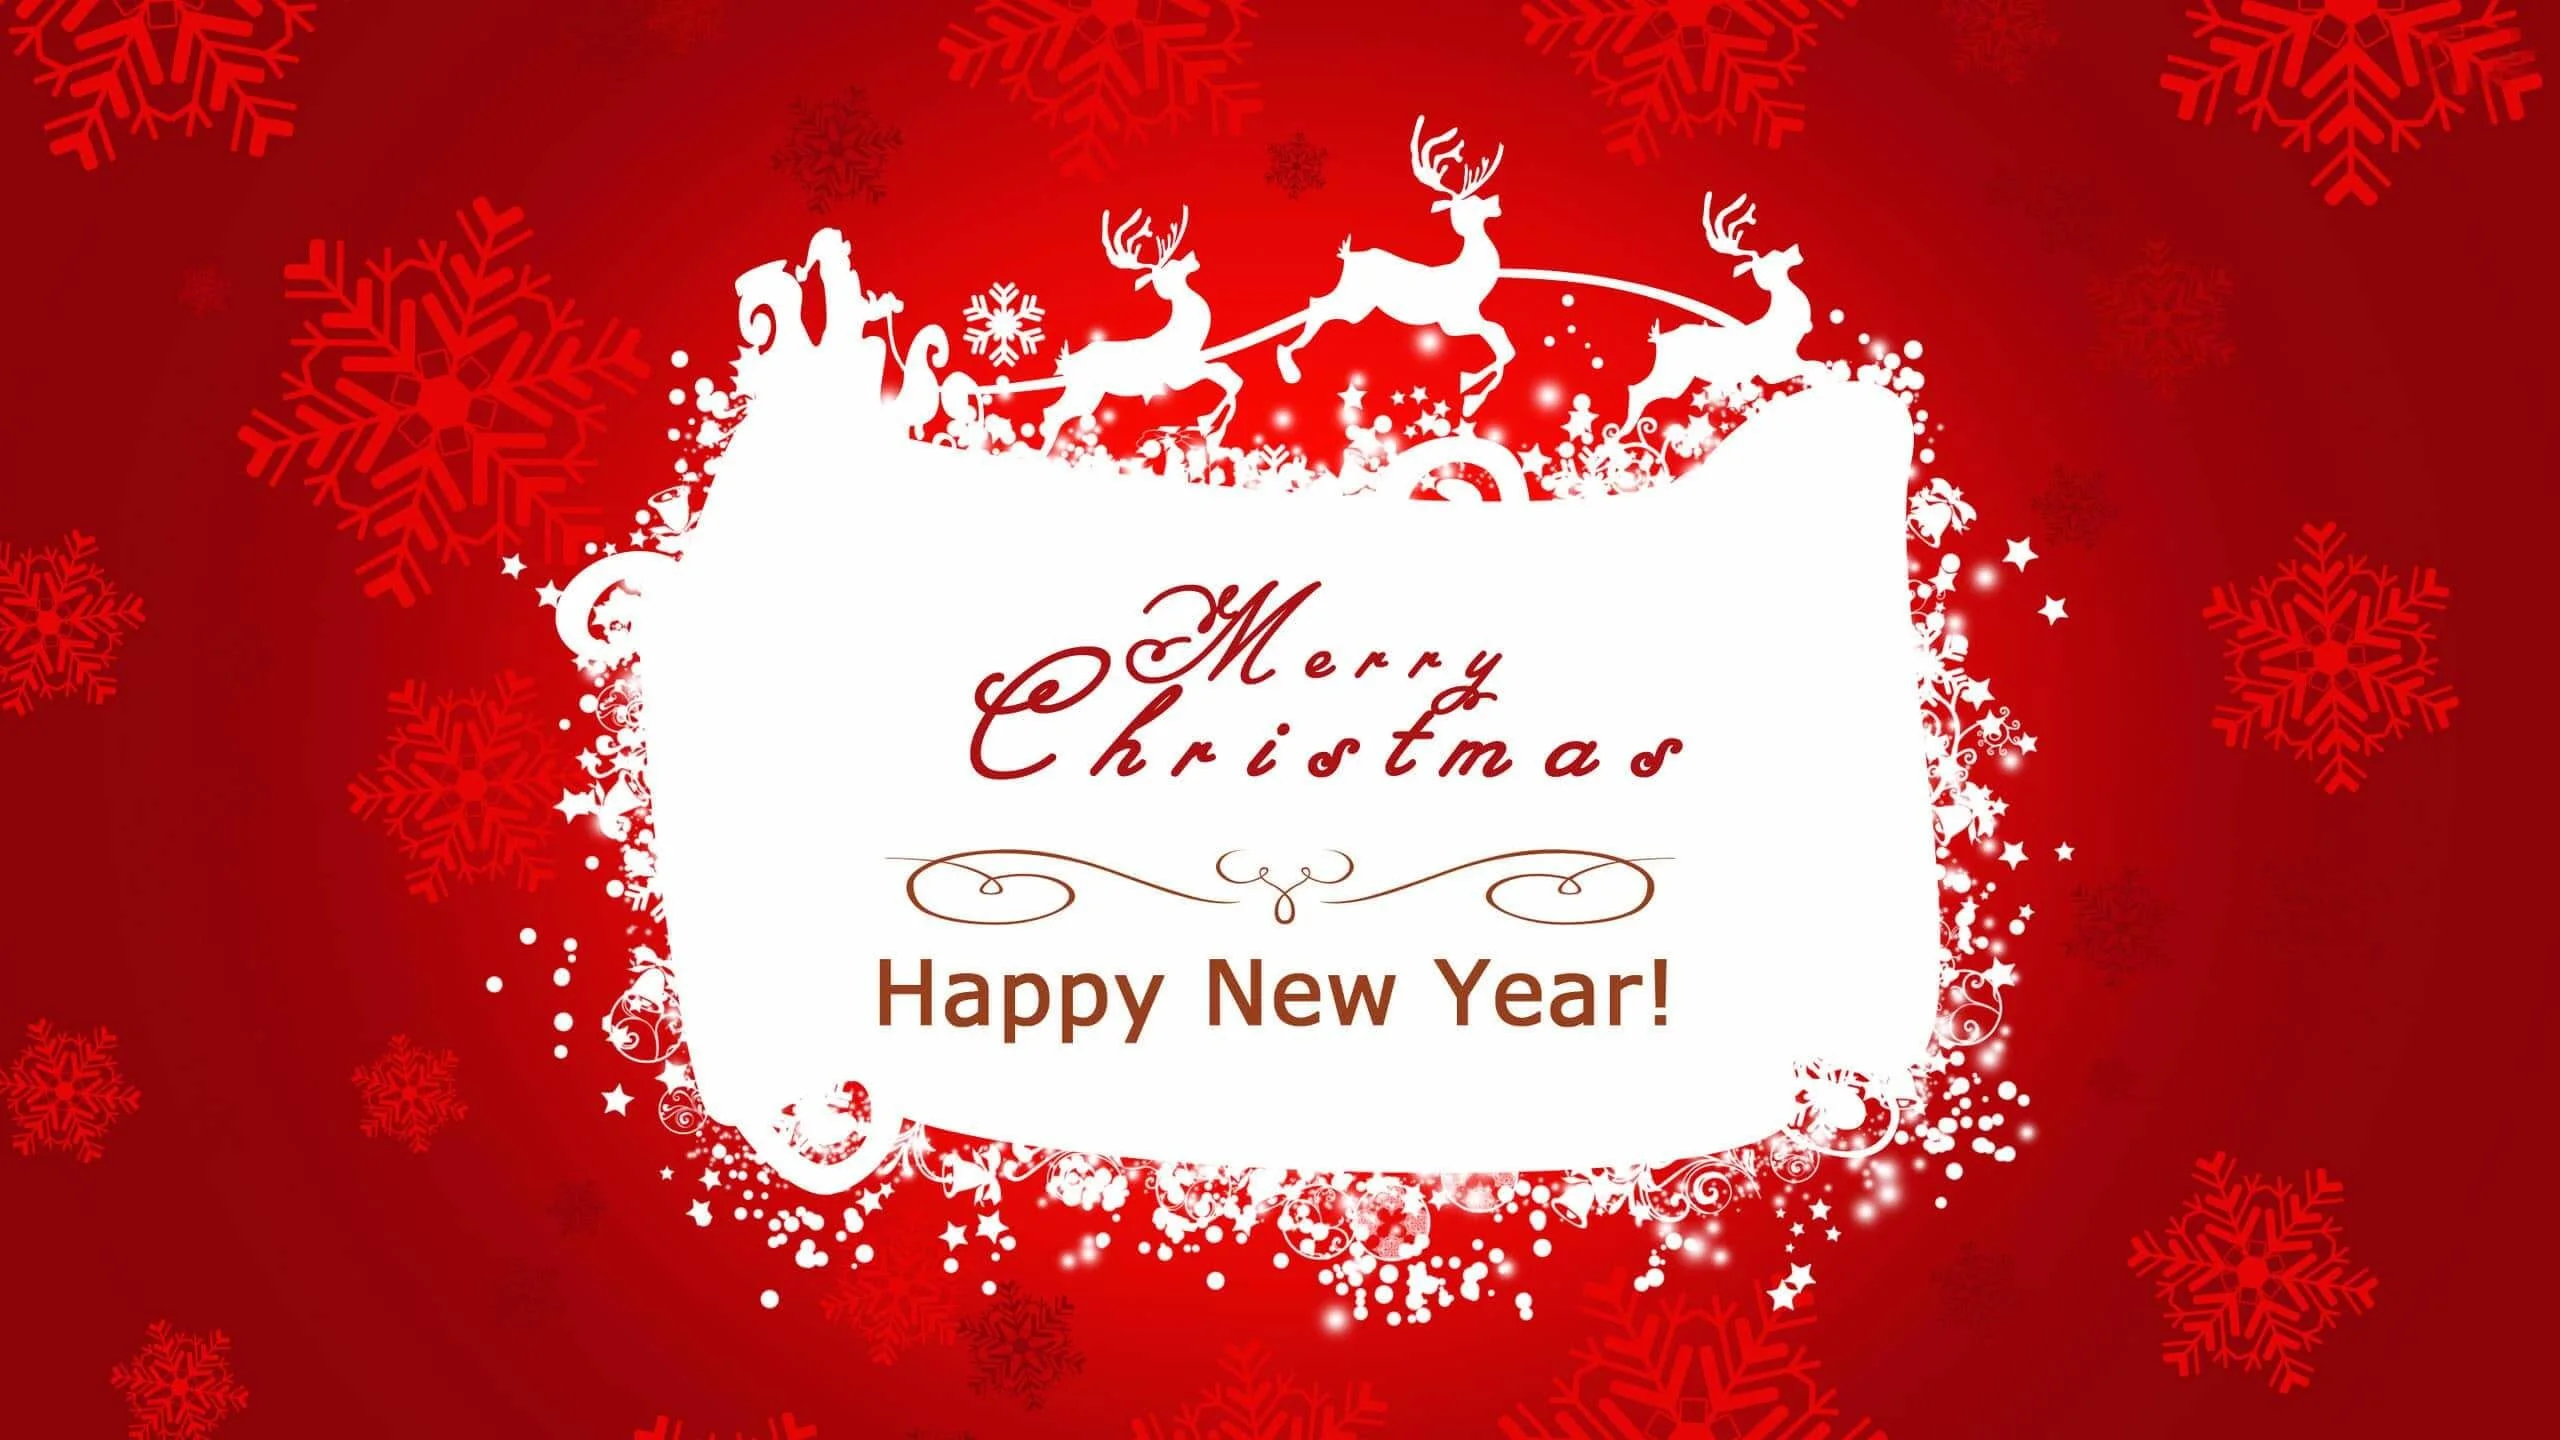 Red happy new year and merry christmas wallpaper